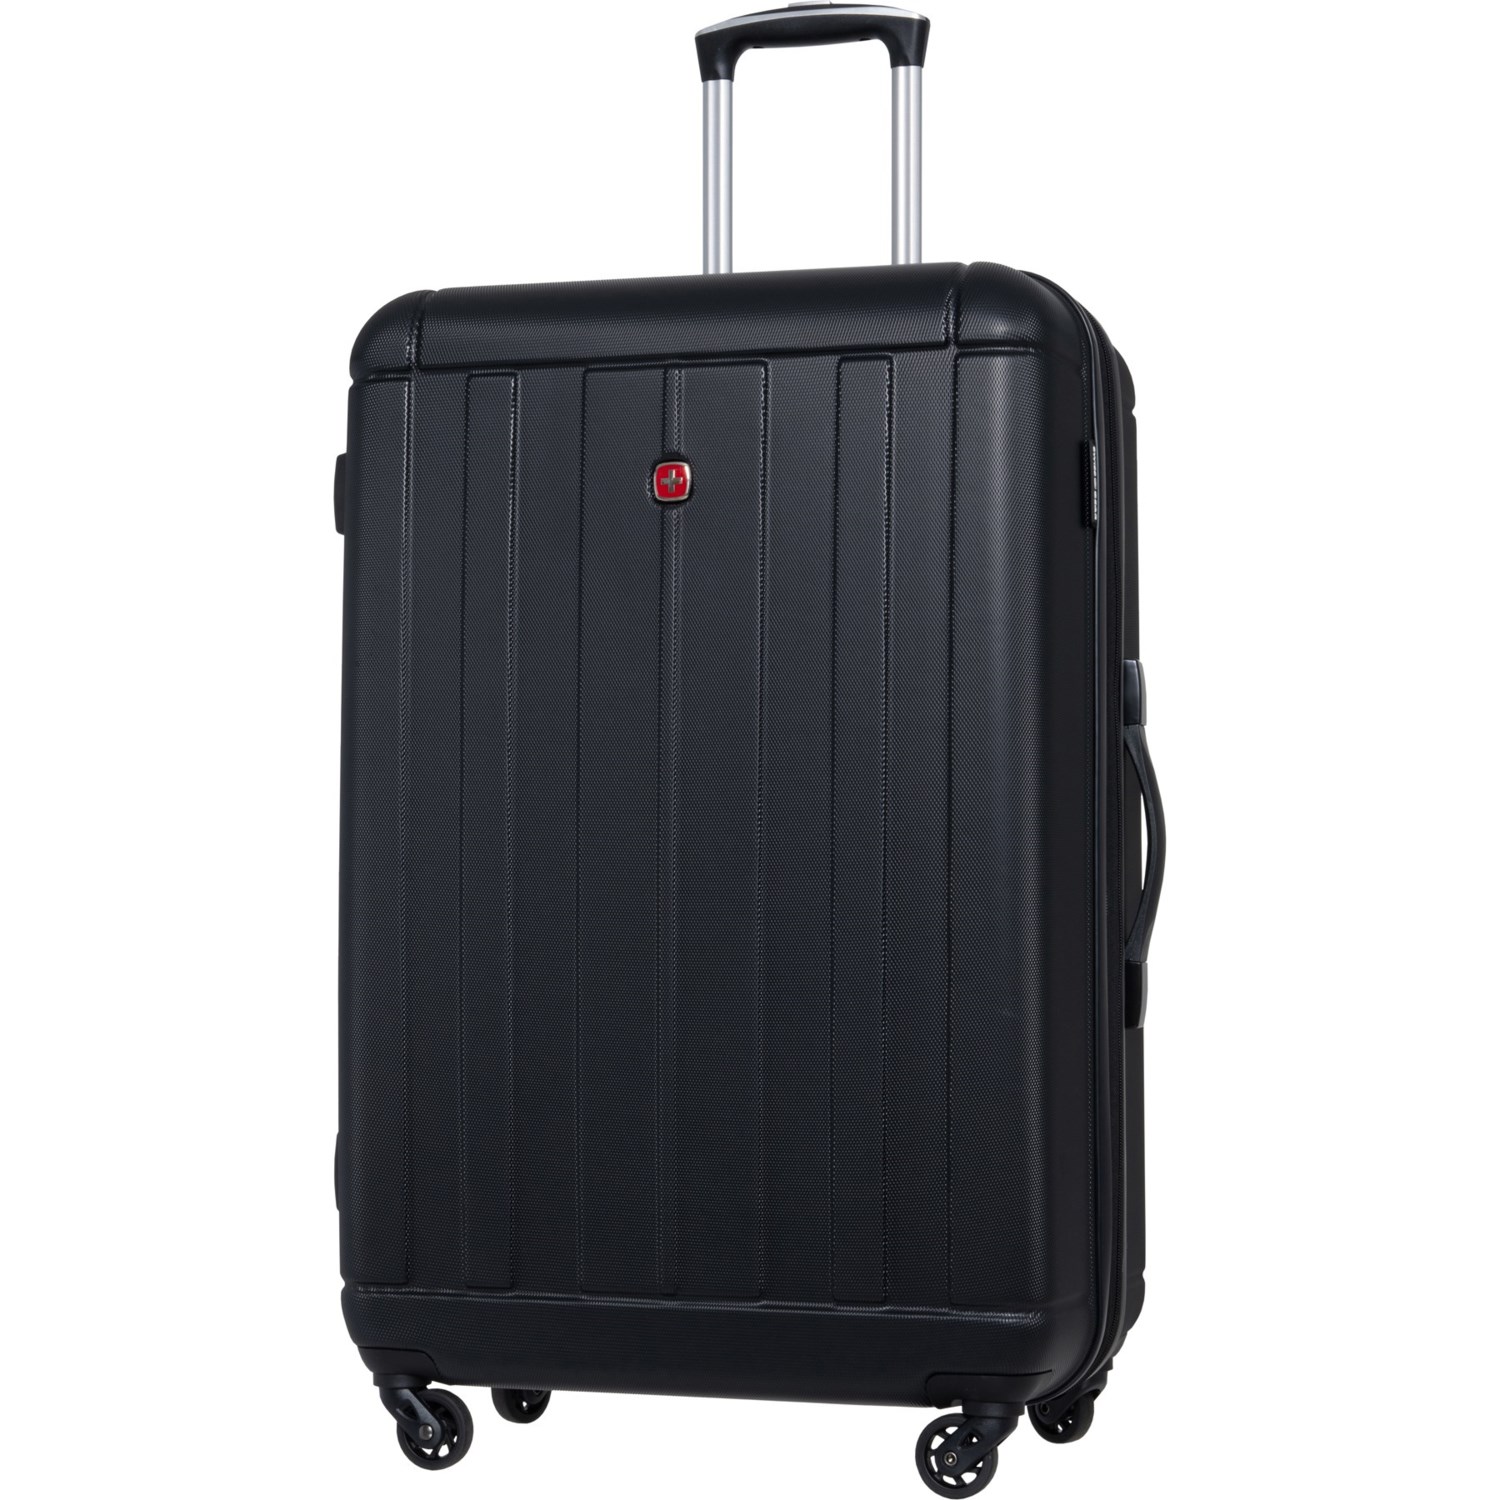 Swiss Gear 28” 6297 Spinner Suitcase - Hardside, Expandable, Black